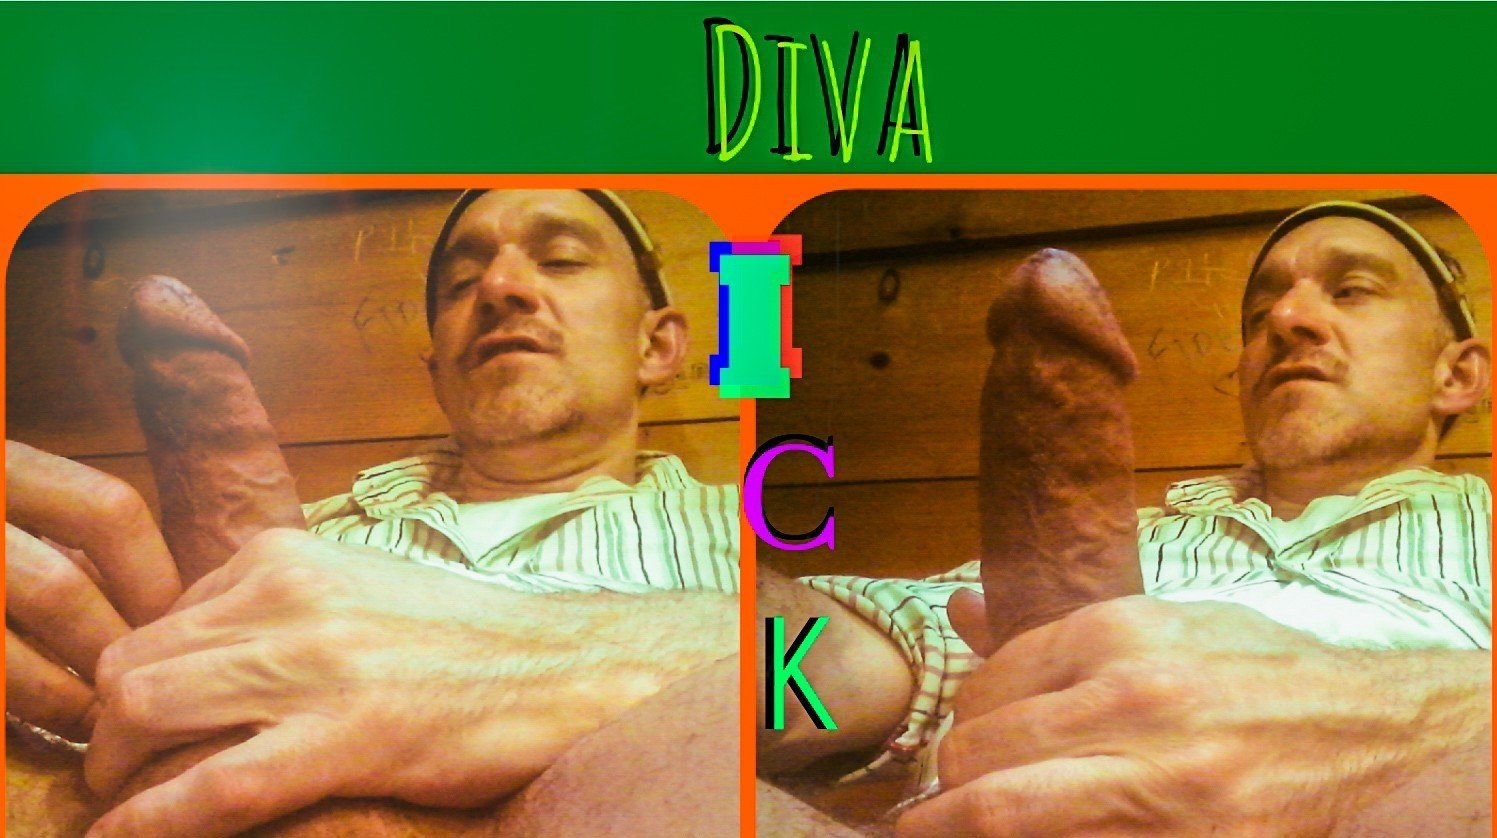 Cover photo of divadick28